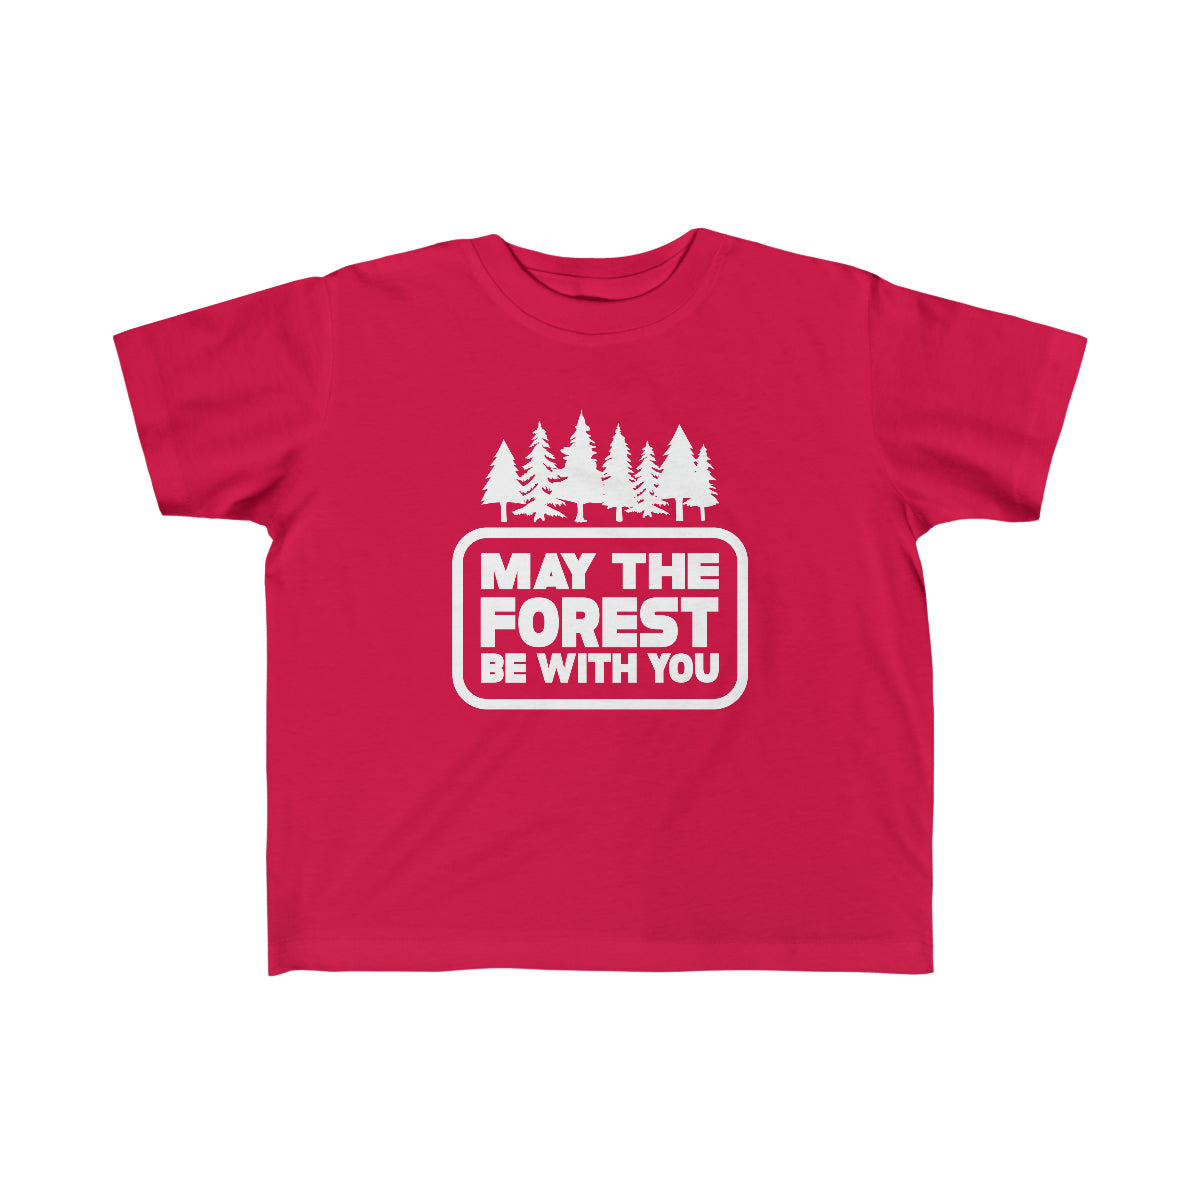 May The Forest Be With You Toddler Tee Red / 2T - The Northwest Store